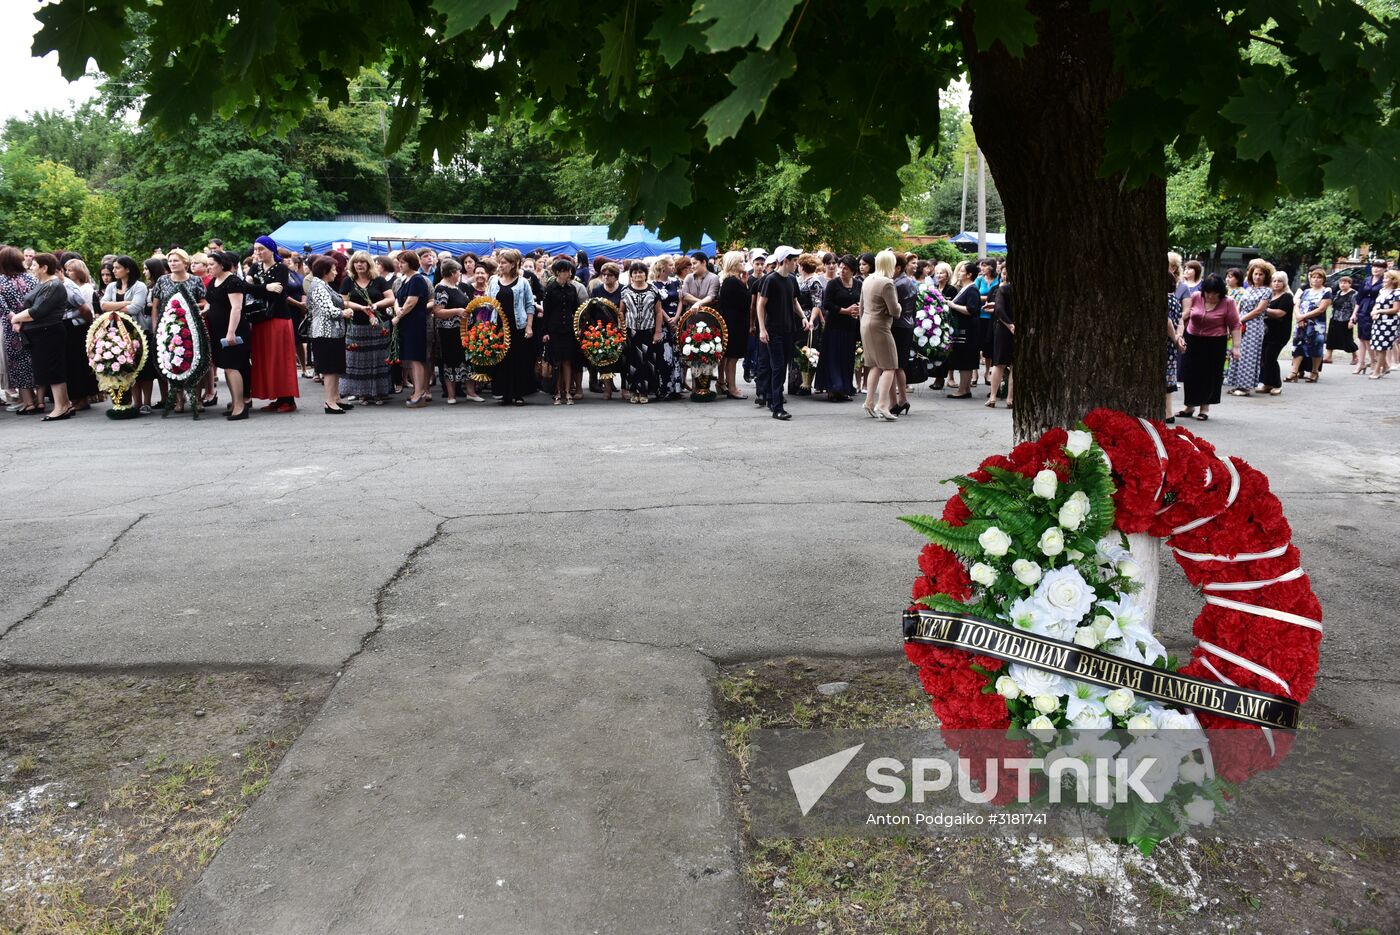 Mourning events in Beslan